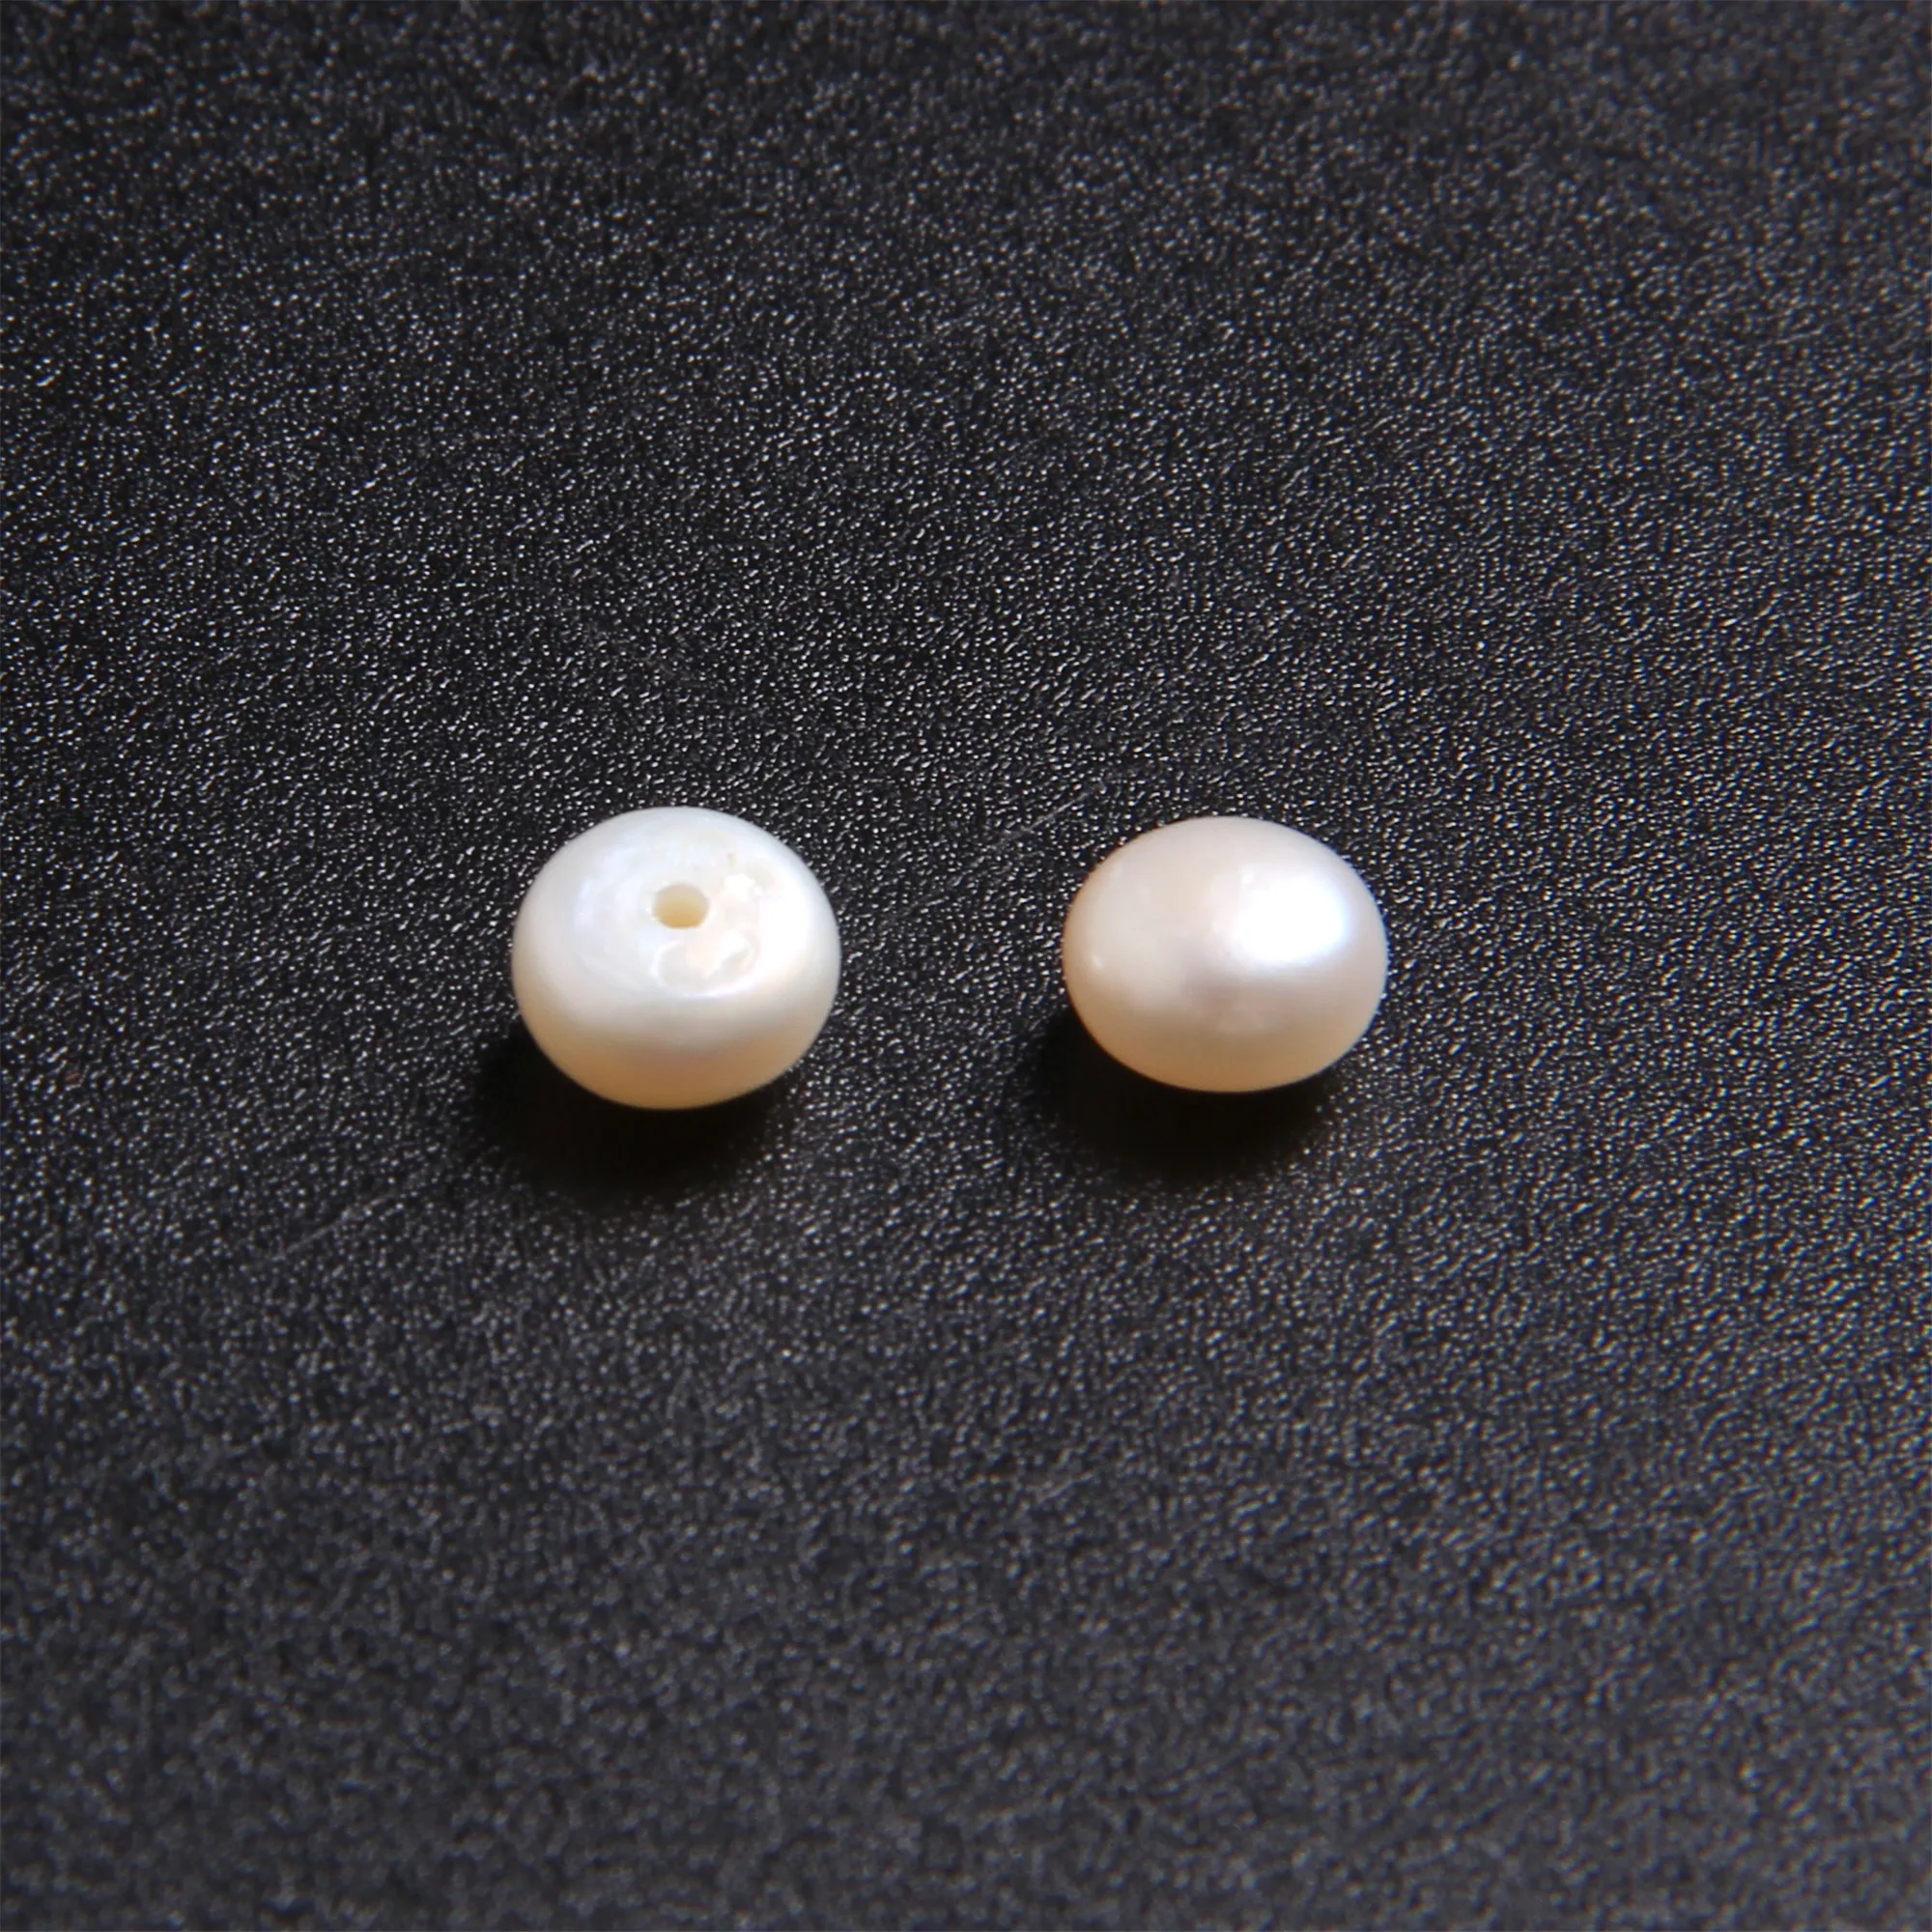 2x Ivory White Half-drilled Round Freshwater Pearls AAA 4mm 5mm 6mm 7mm 8mm 9mm 